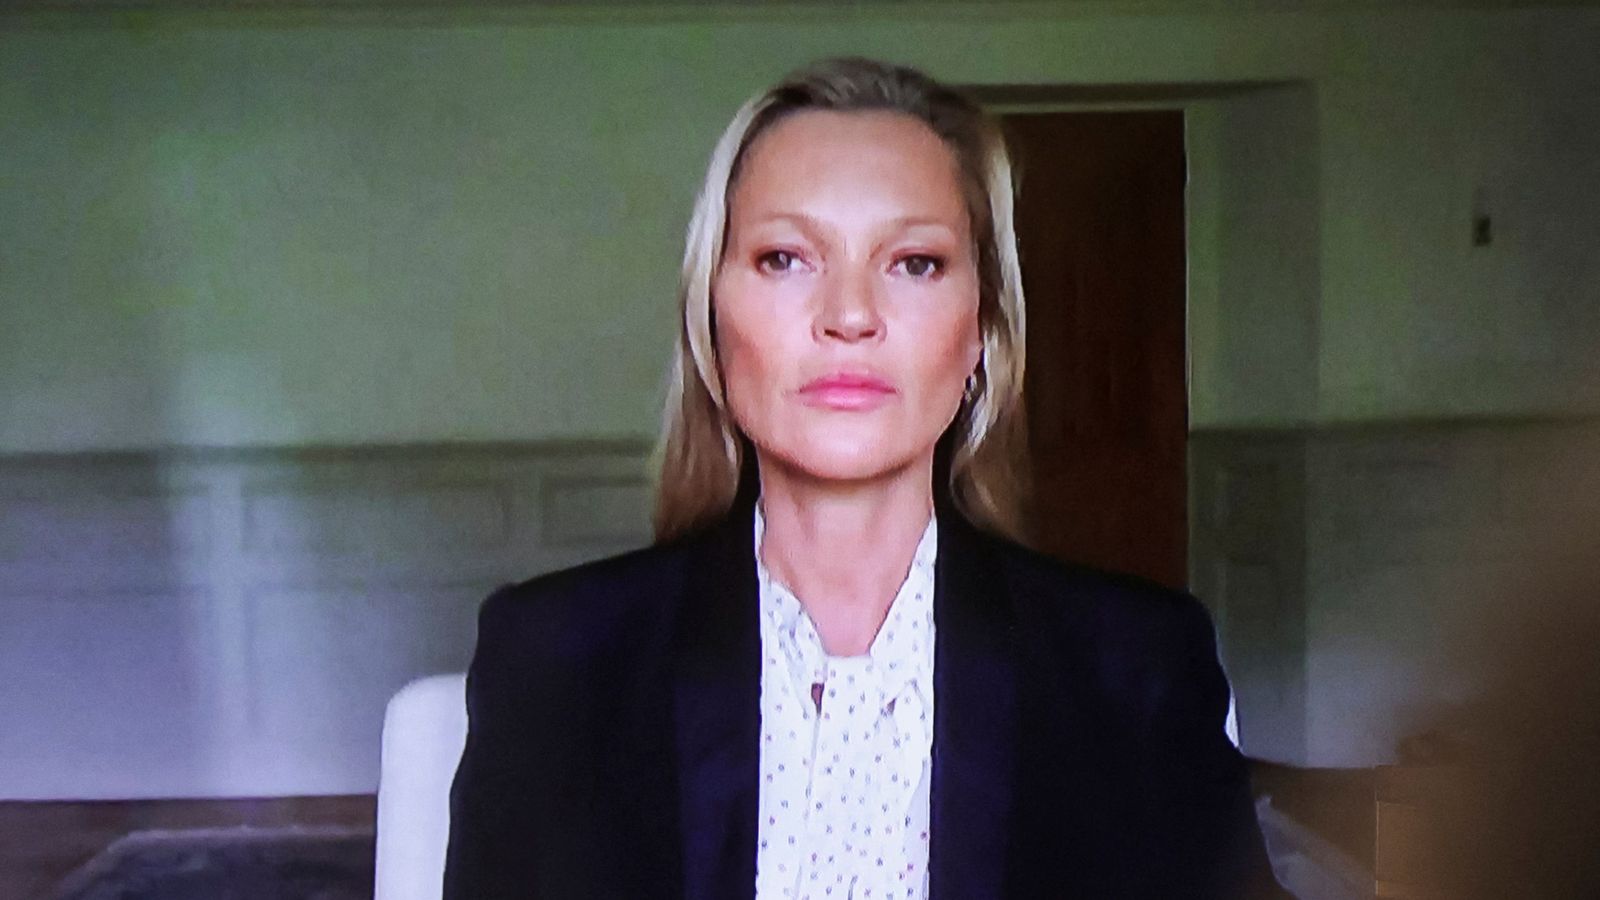 Depp v Heard: Kate Moss says actor ‘never pushed me, kicked me or threw me down any stairs’